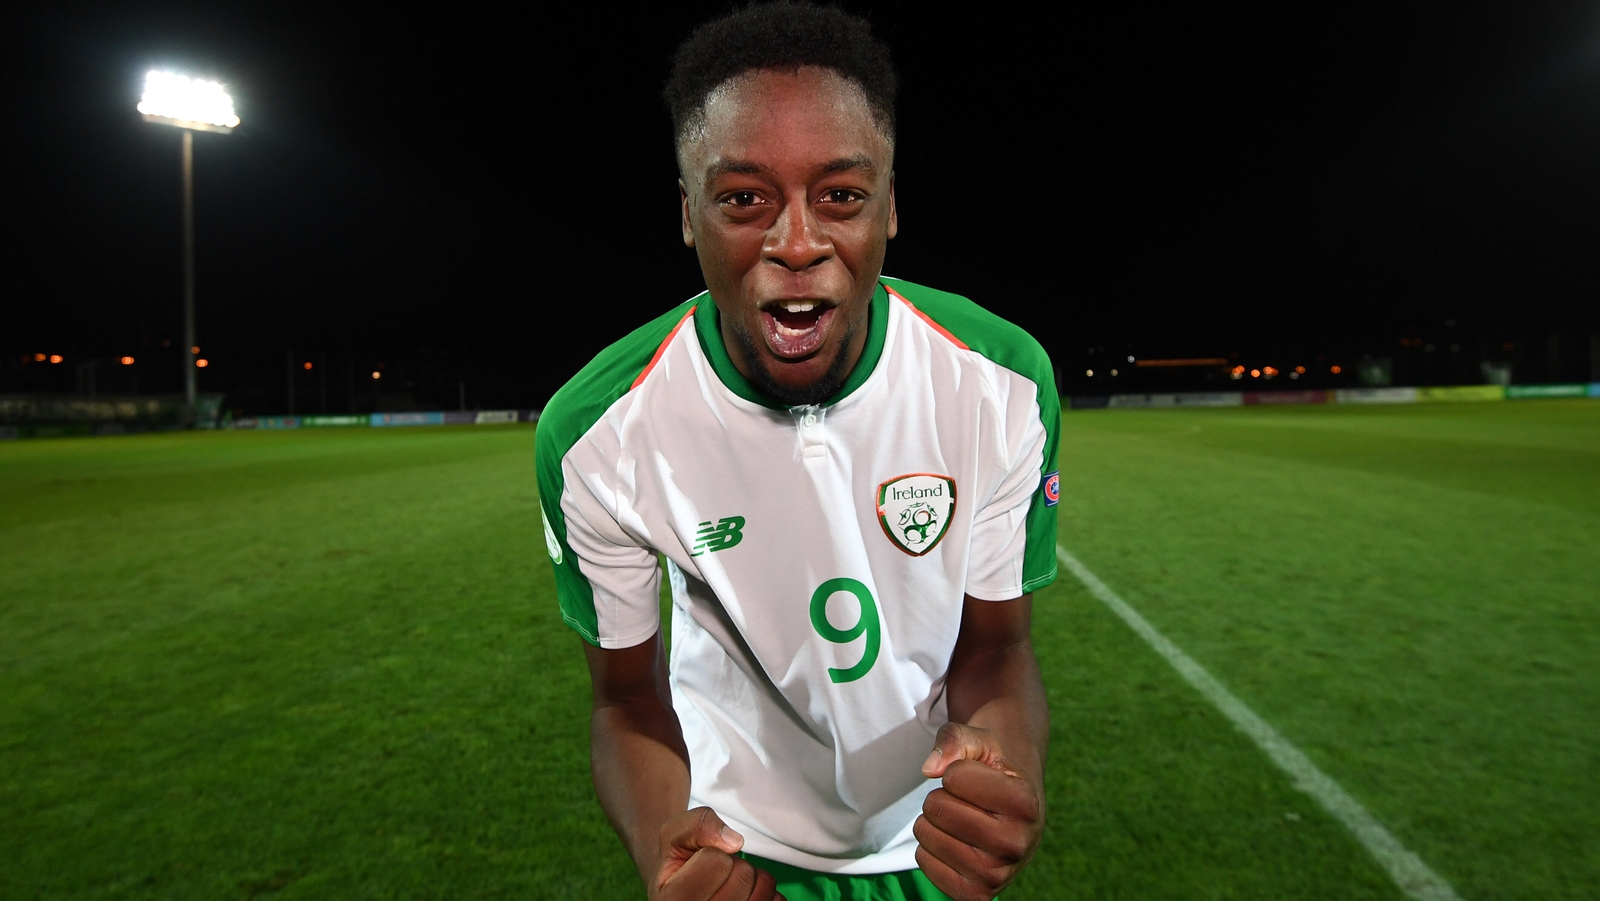 Young, black and Irish - the generation ready to rise